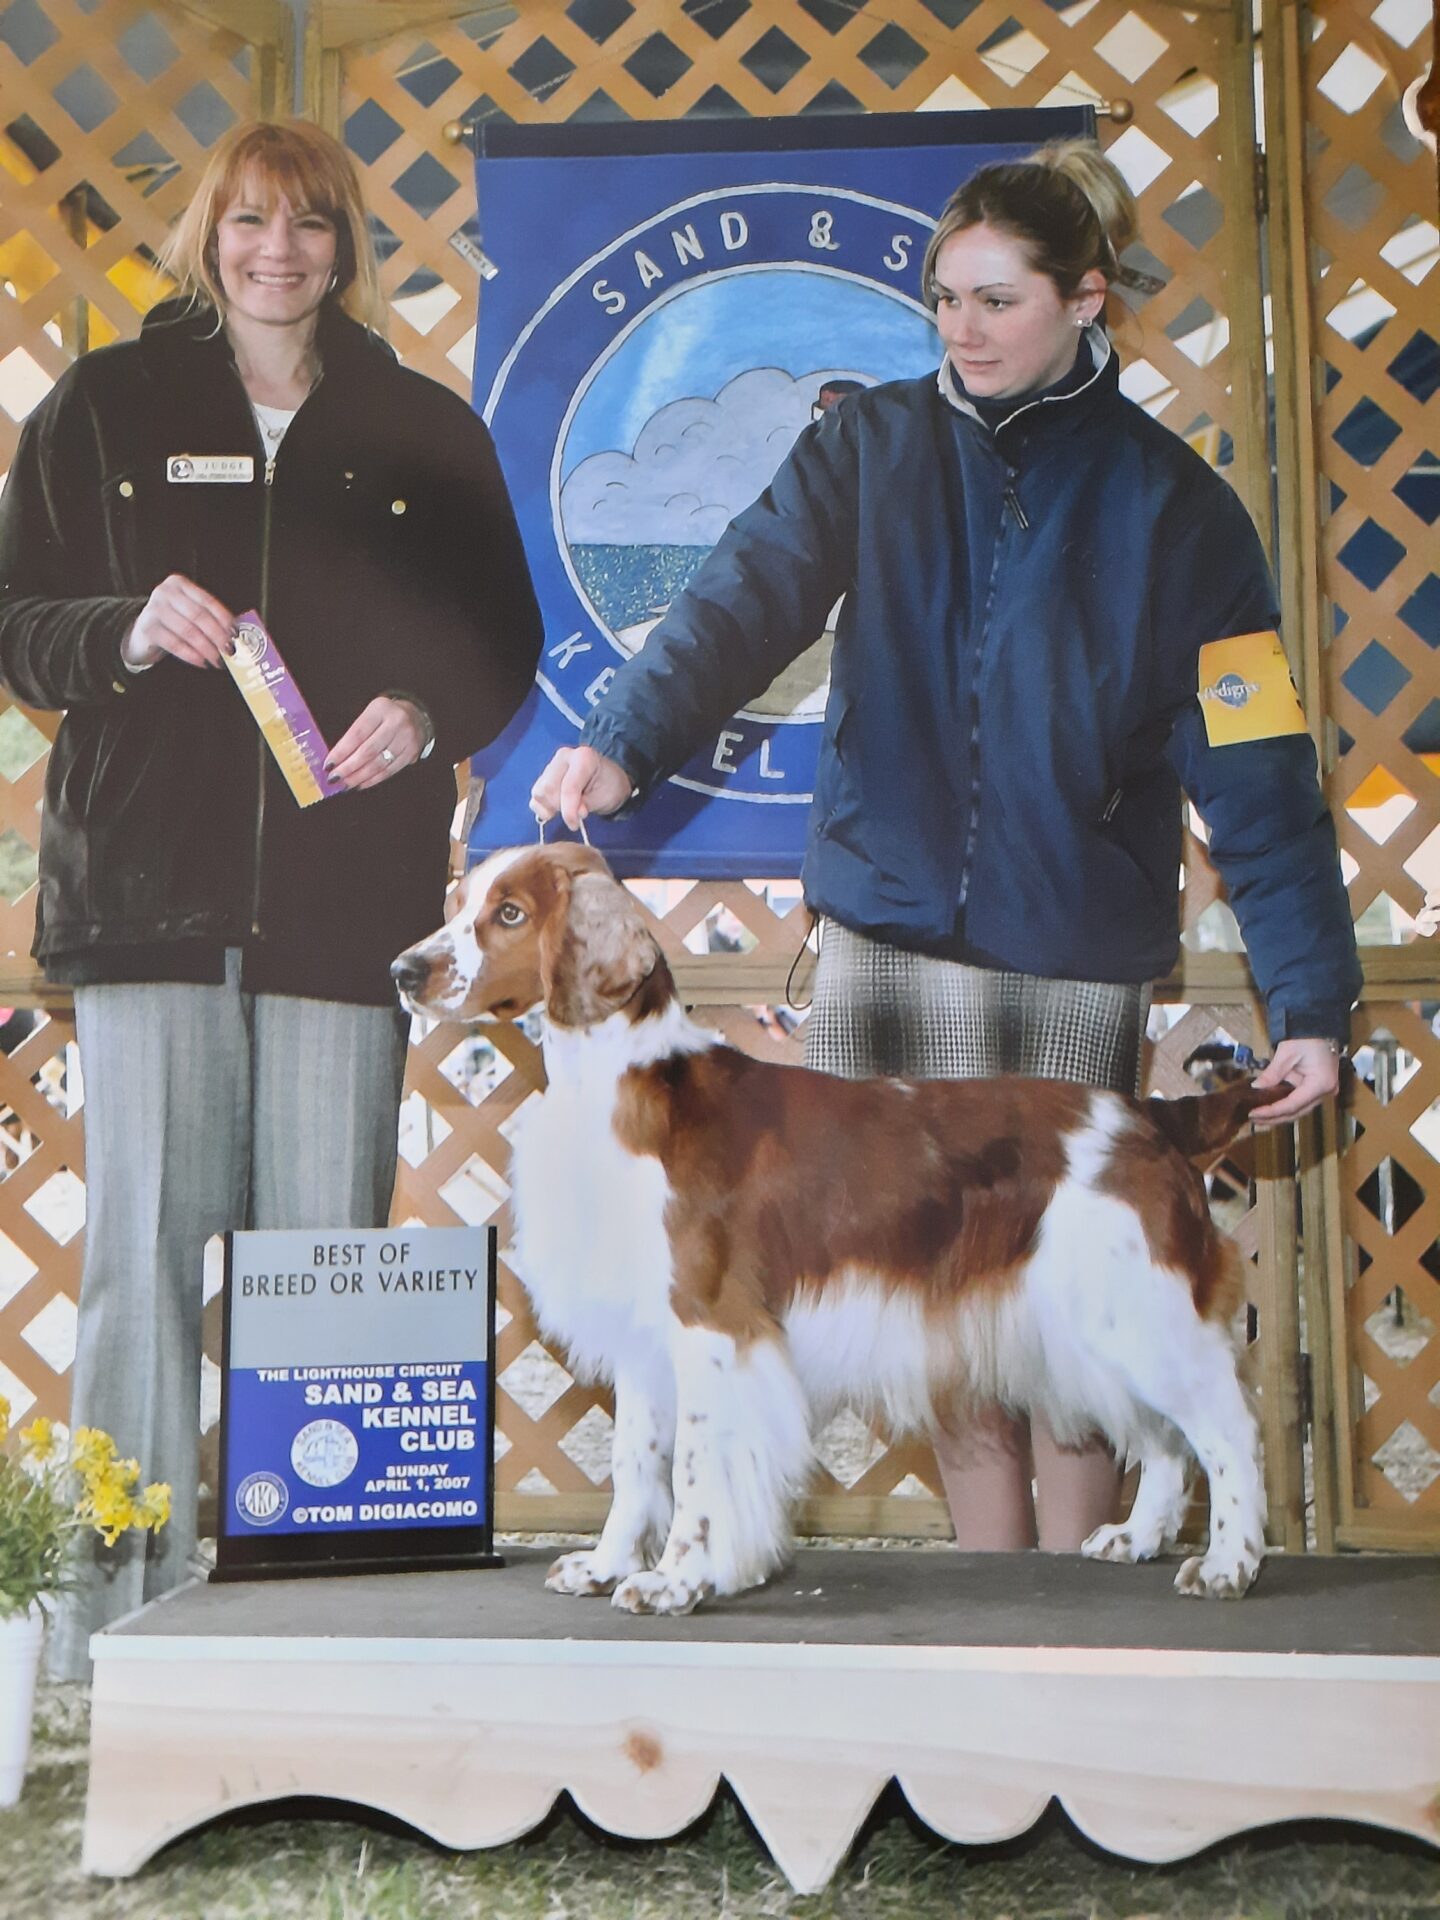 two women and a dog at a dog show